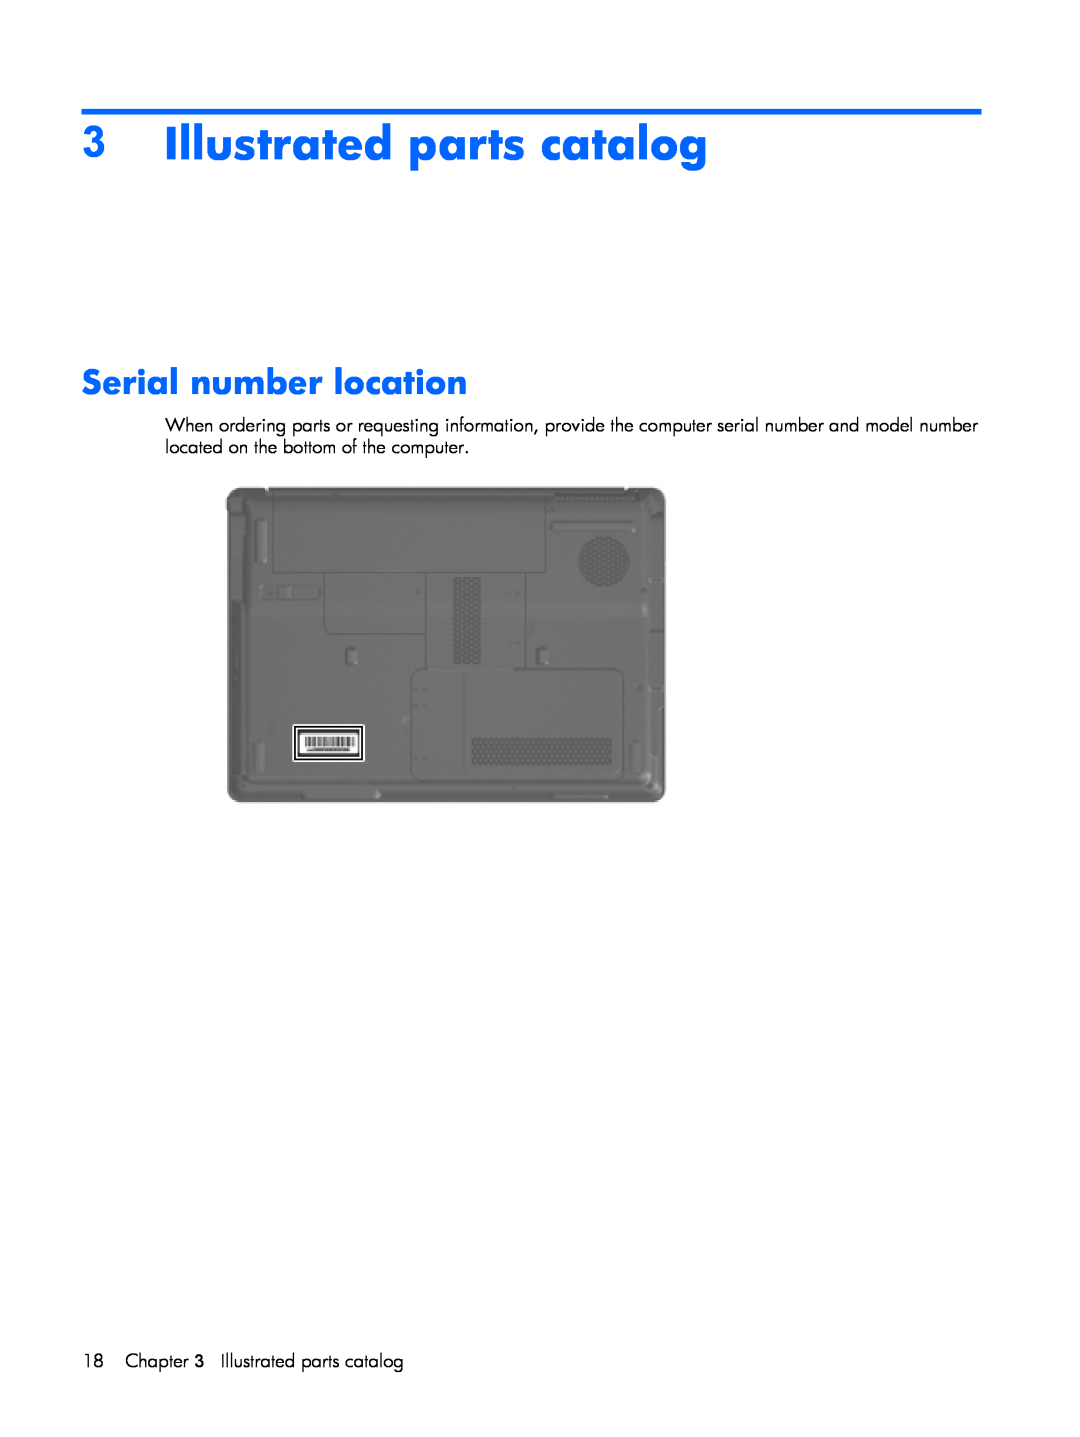 HP V3819TU, V3523TU, V3930TU, V3931TU, V3929TU, V3928TU, V3925TU, V3923TU manual Illustrated parts catalog, Serial number location 